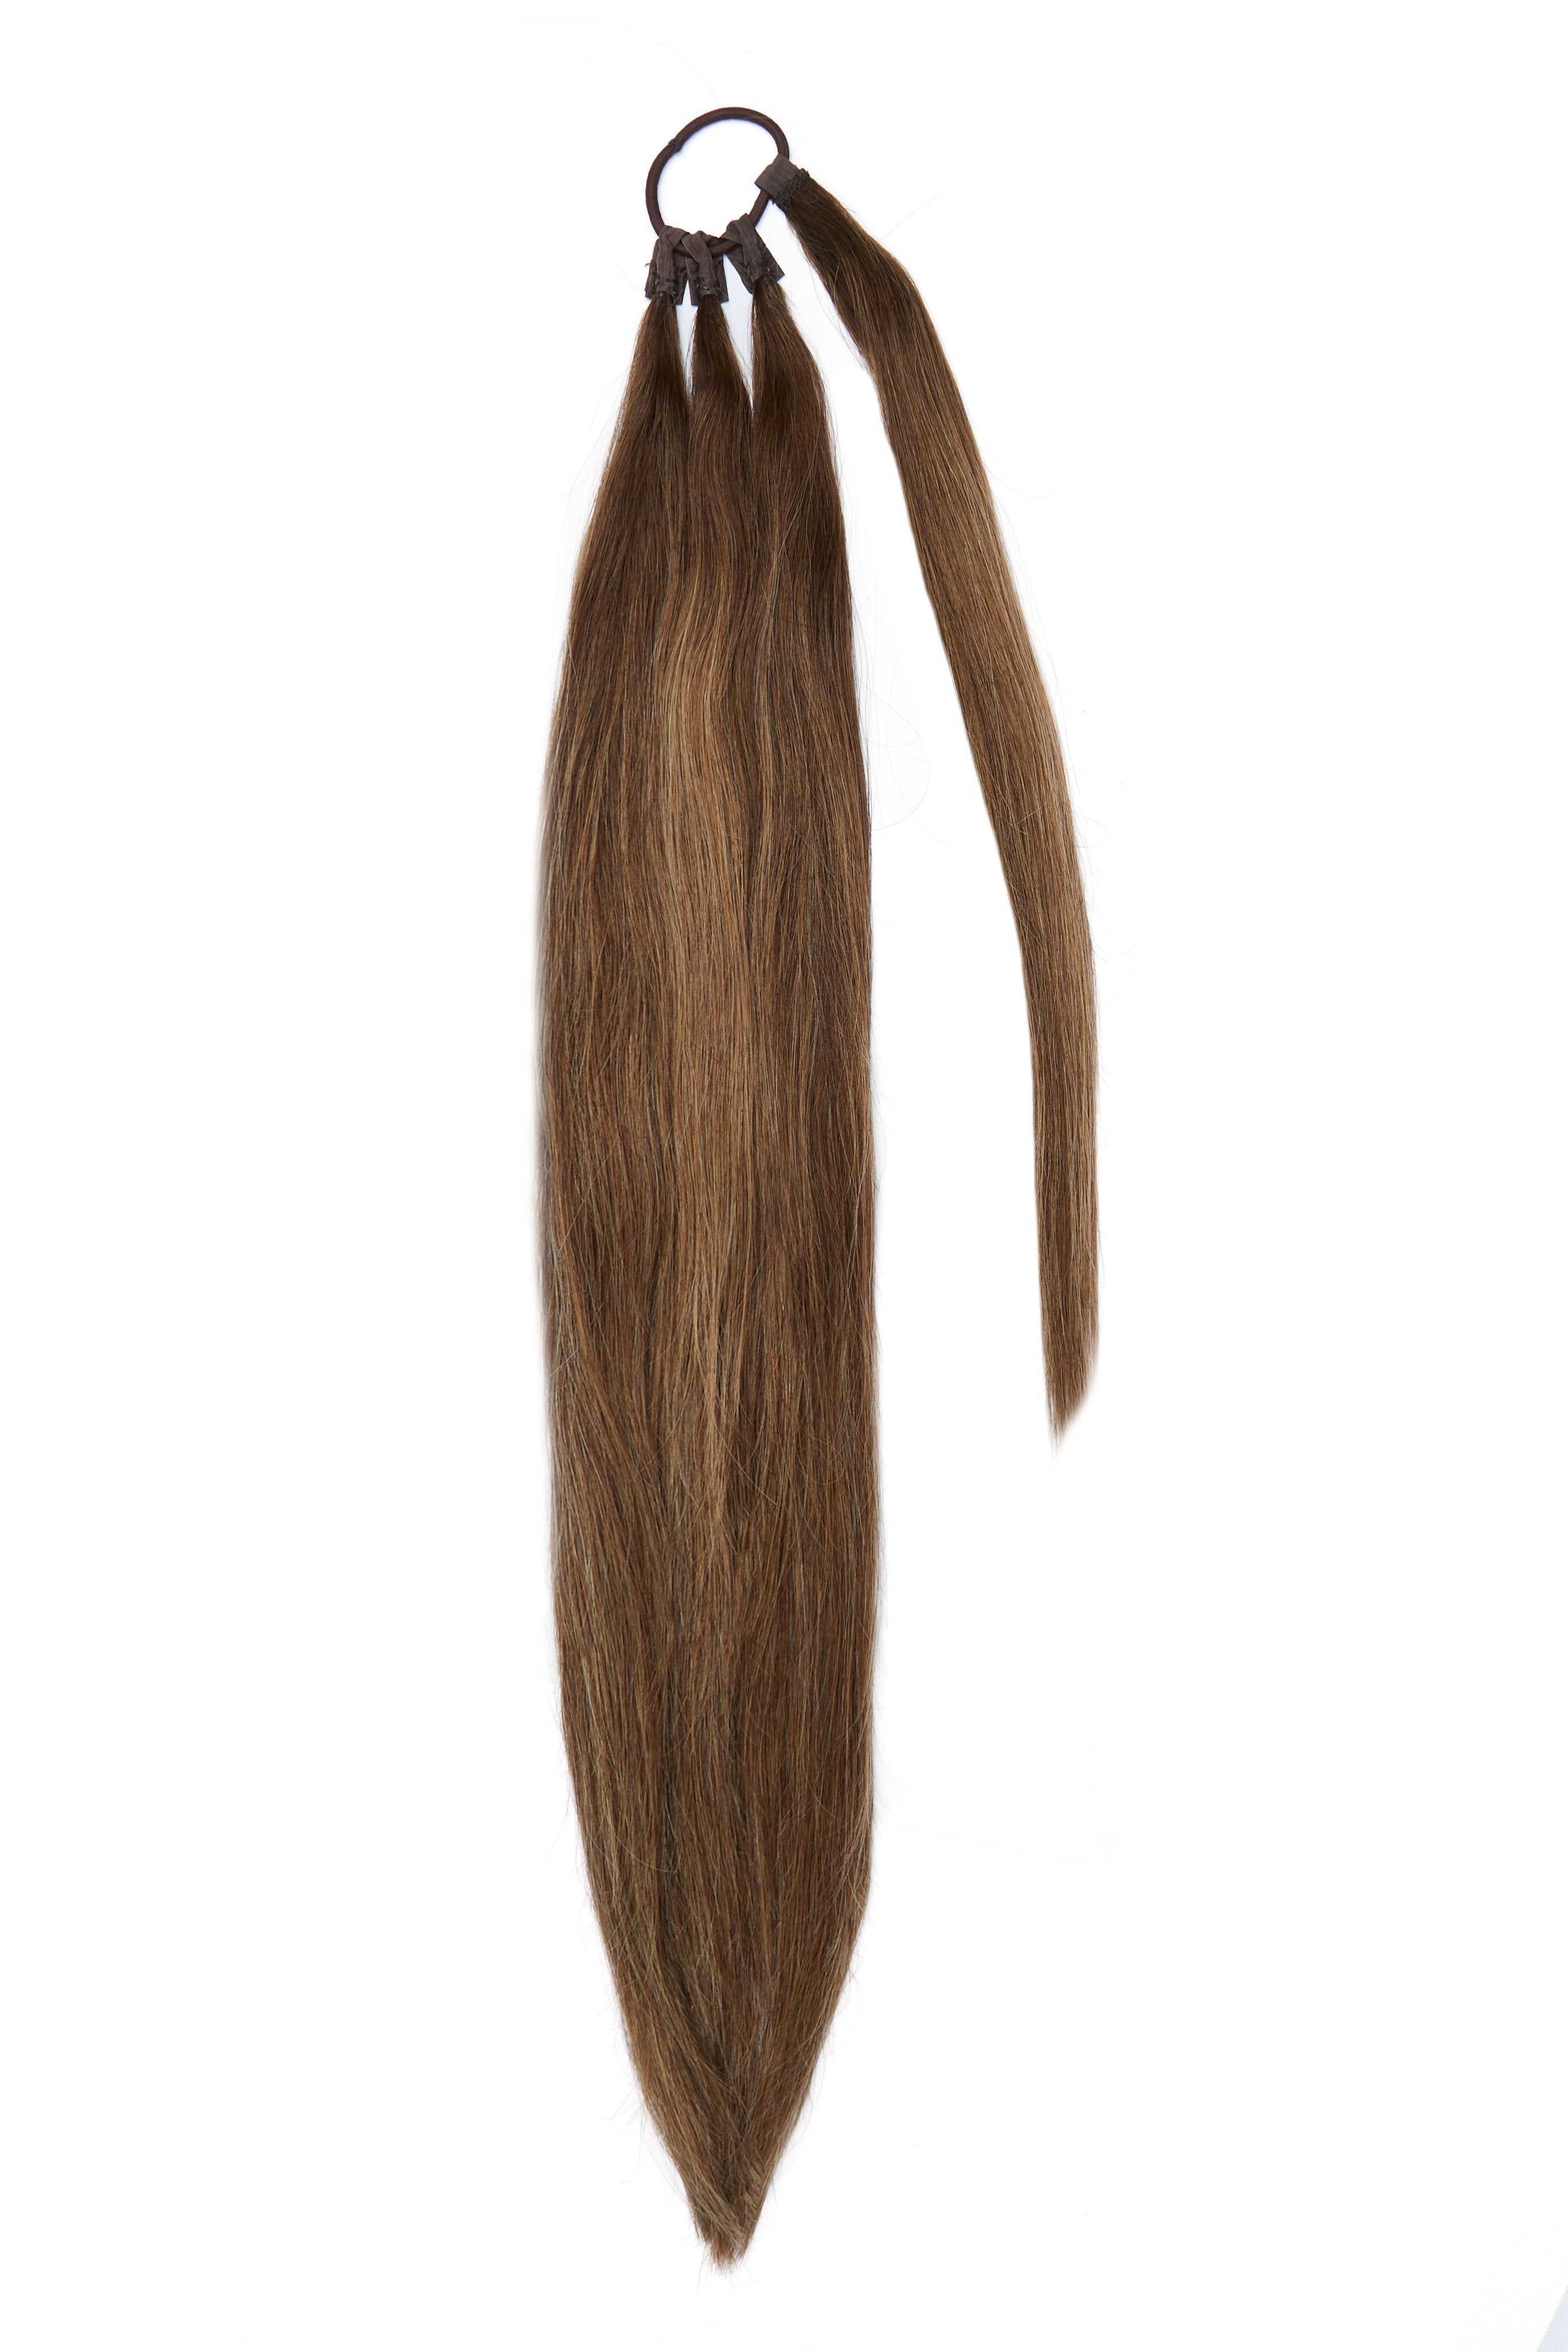 Beauty Works - 24" Insta Braid Ponytail Brond'mbre